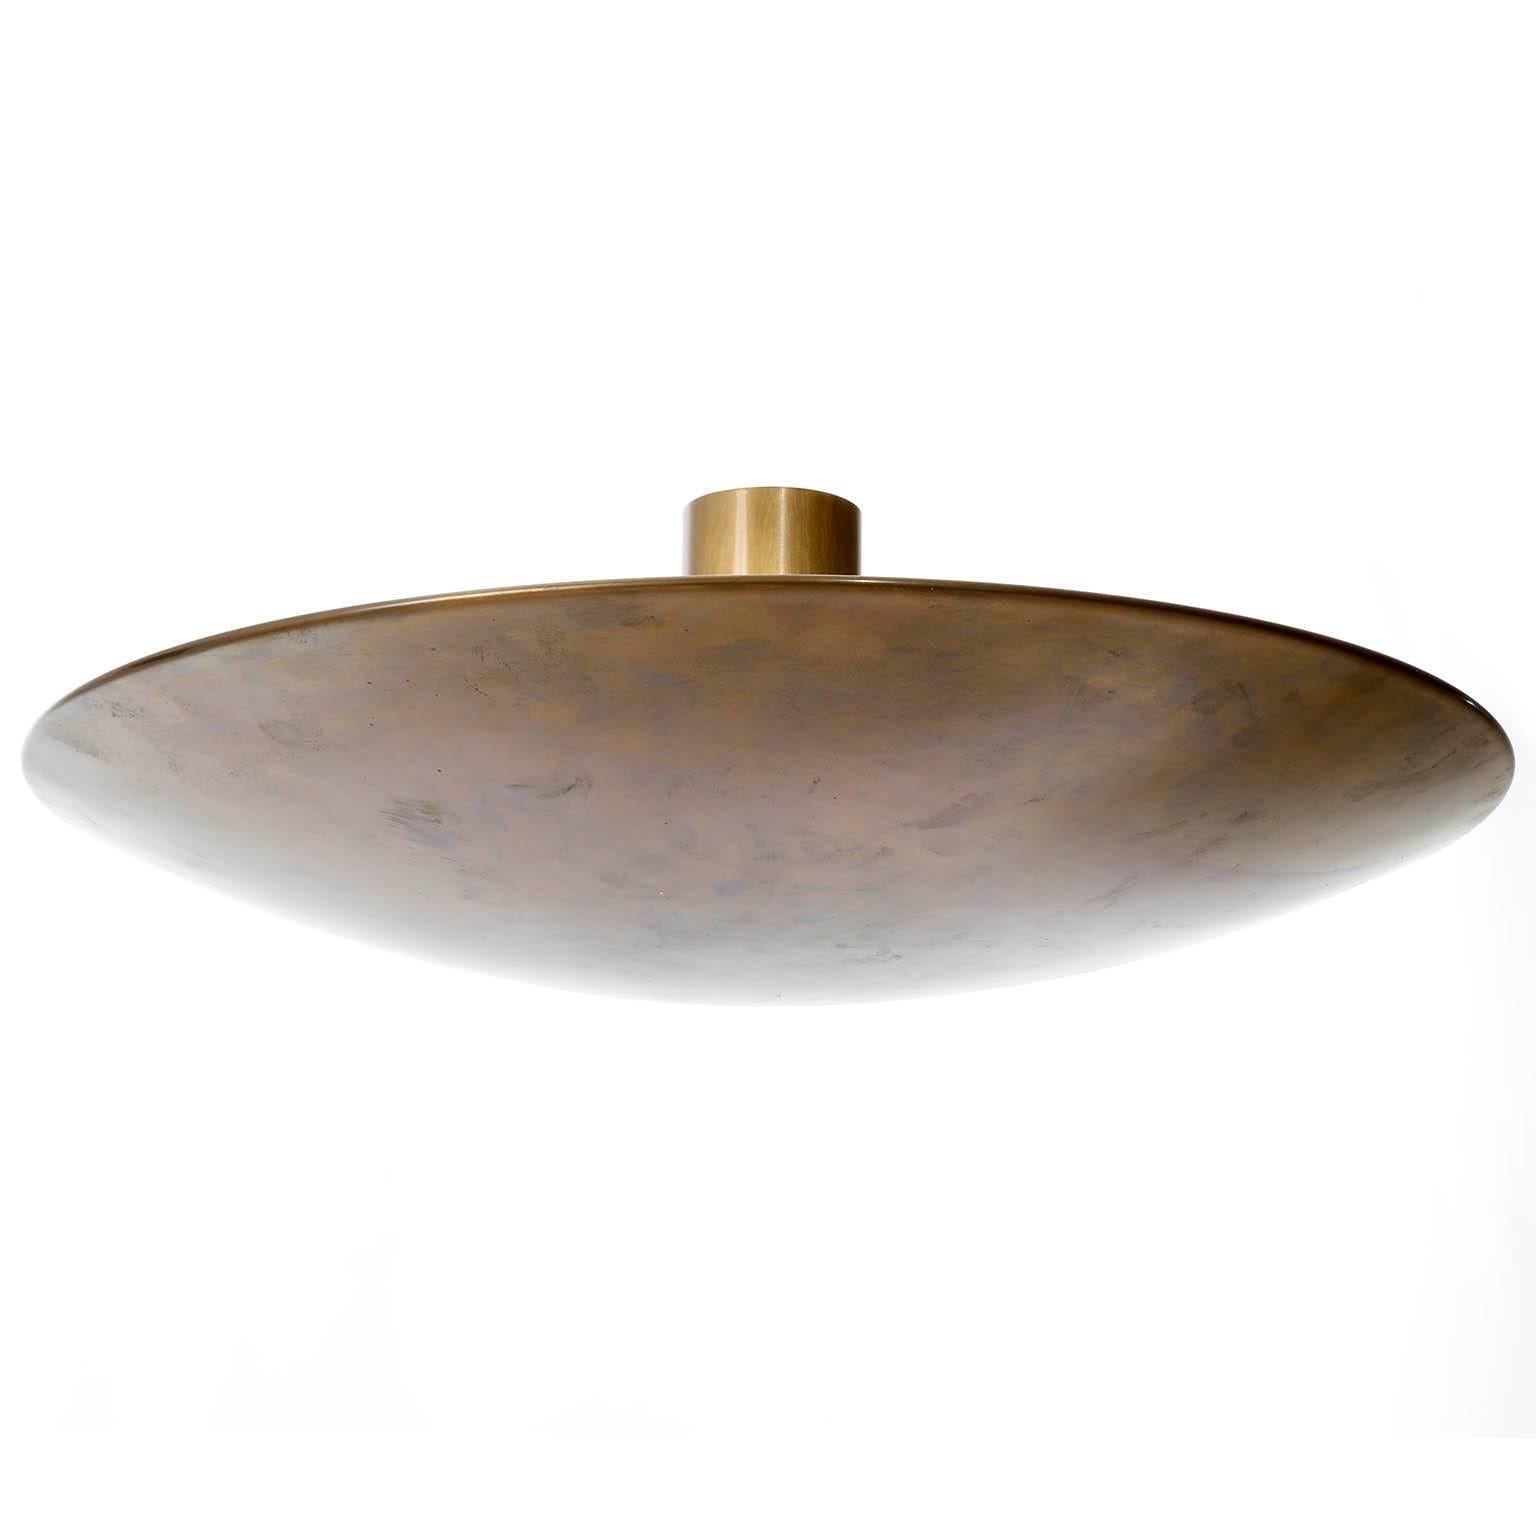 A large uplight bowl ceiling light fixture by Florian Schulz, Germany, manufactured in midcentury, circa 1970 (late 1960s or early 1970s). 
This uplighter is made of solid brass with great patina.
The lamp has five sockets for medium or standard